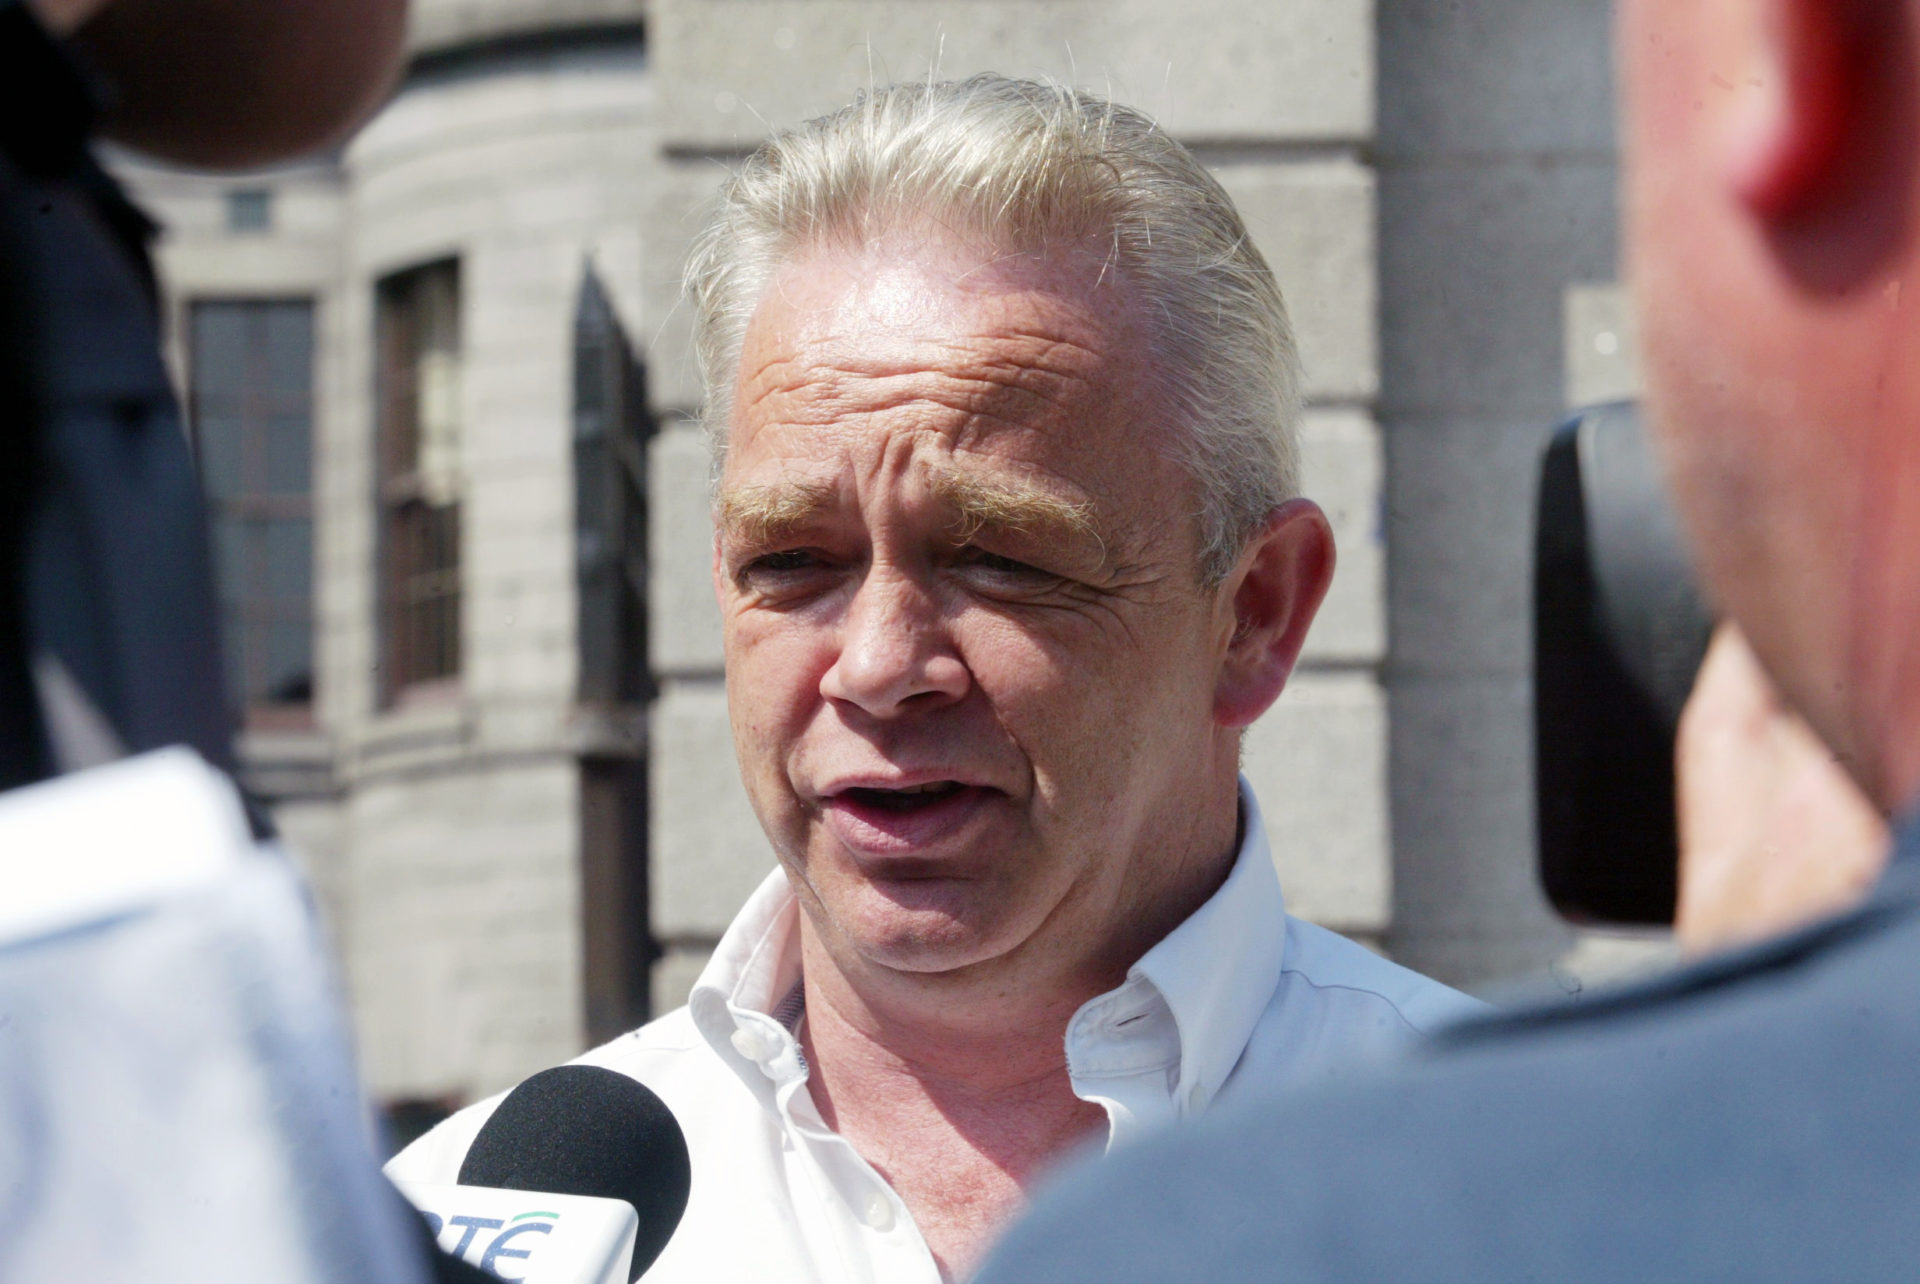 Jimmy Guerin talks to the media outside the Court of Criminal Appeal after John Gilligan failed in his appeal against his conviction for drugs offences